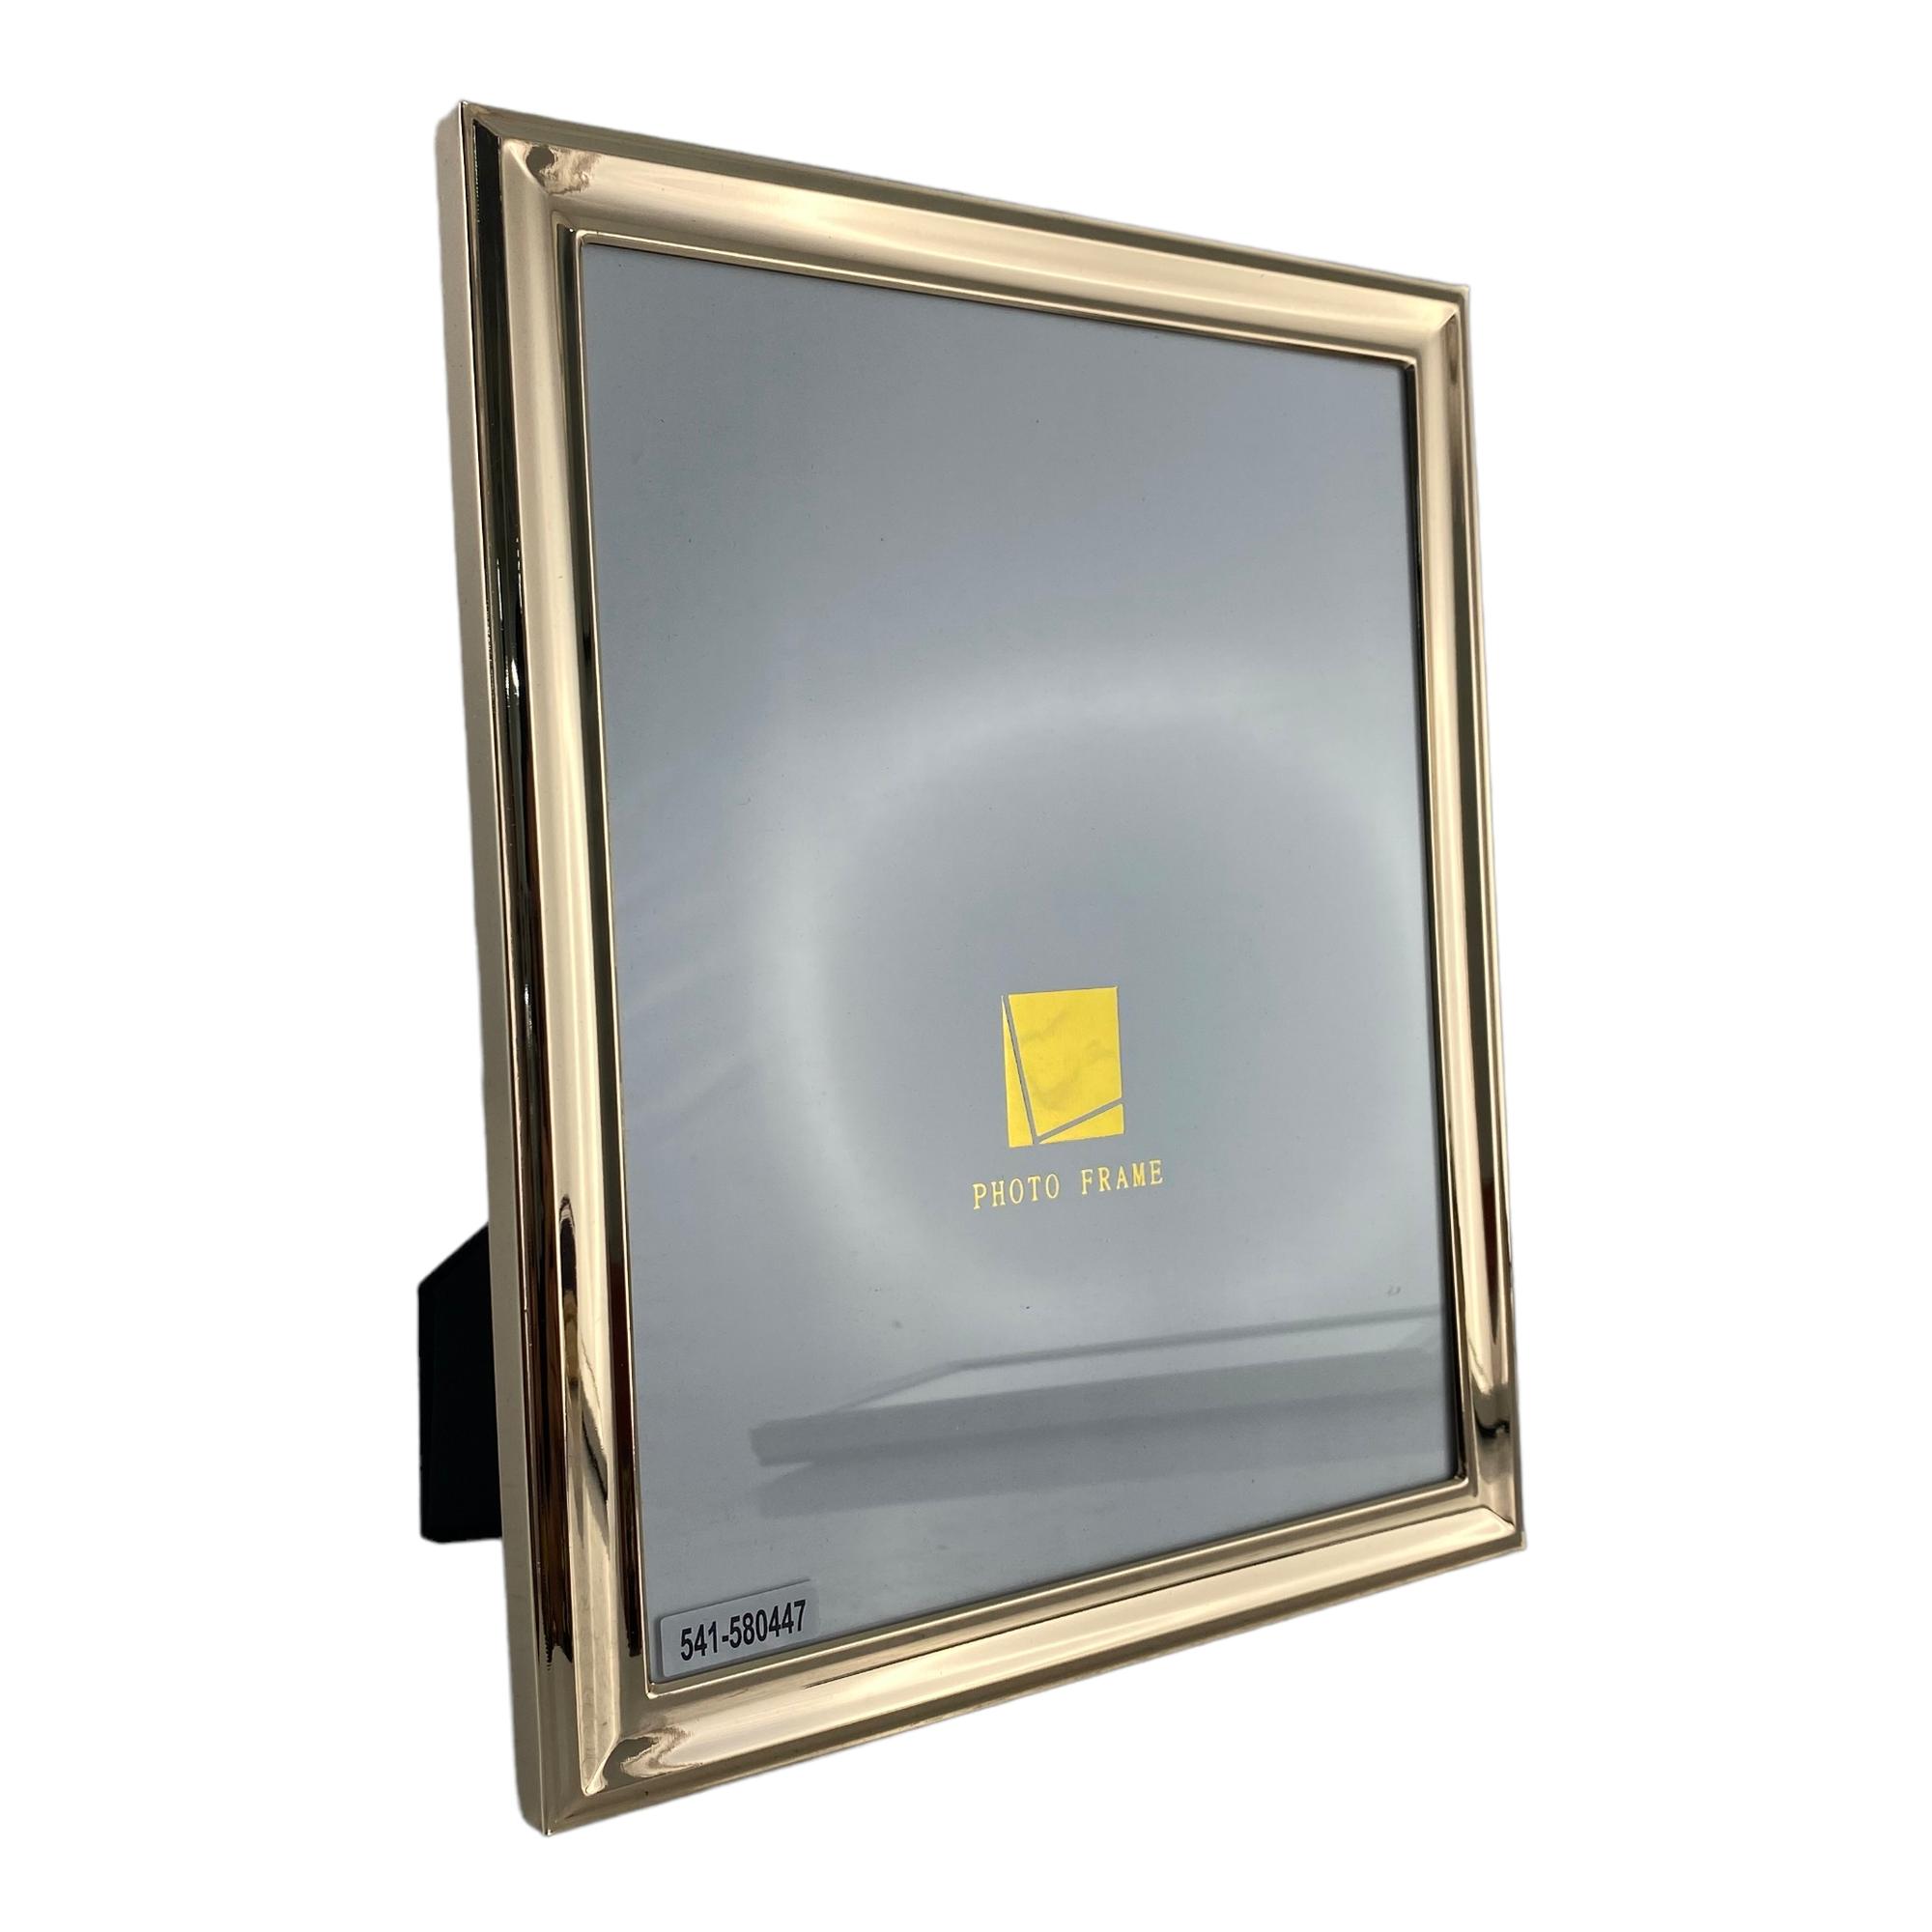 PICTURE FRAME 8X10 28X23X1.7 CM - 541-580447